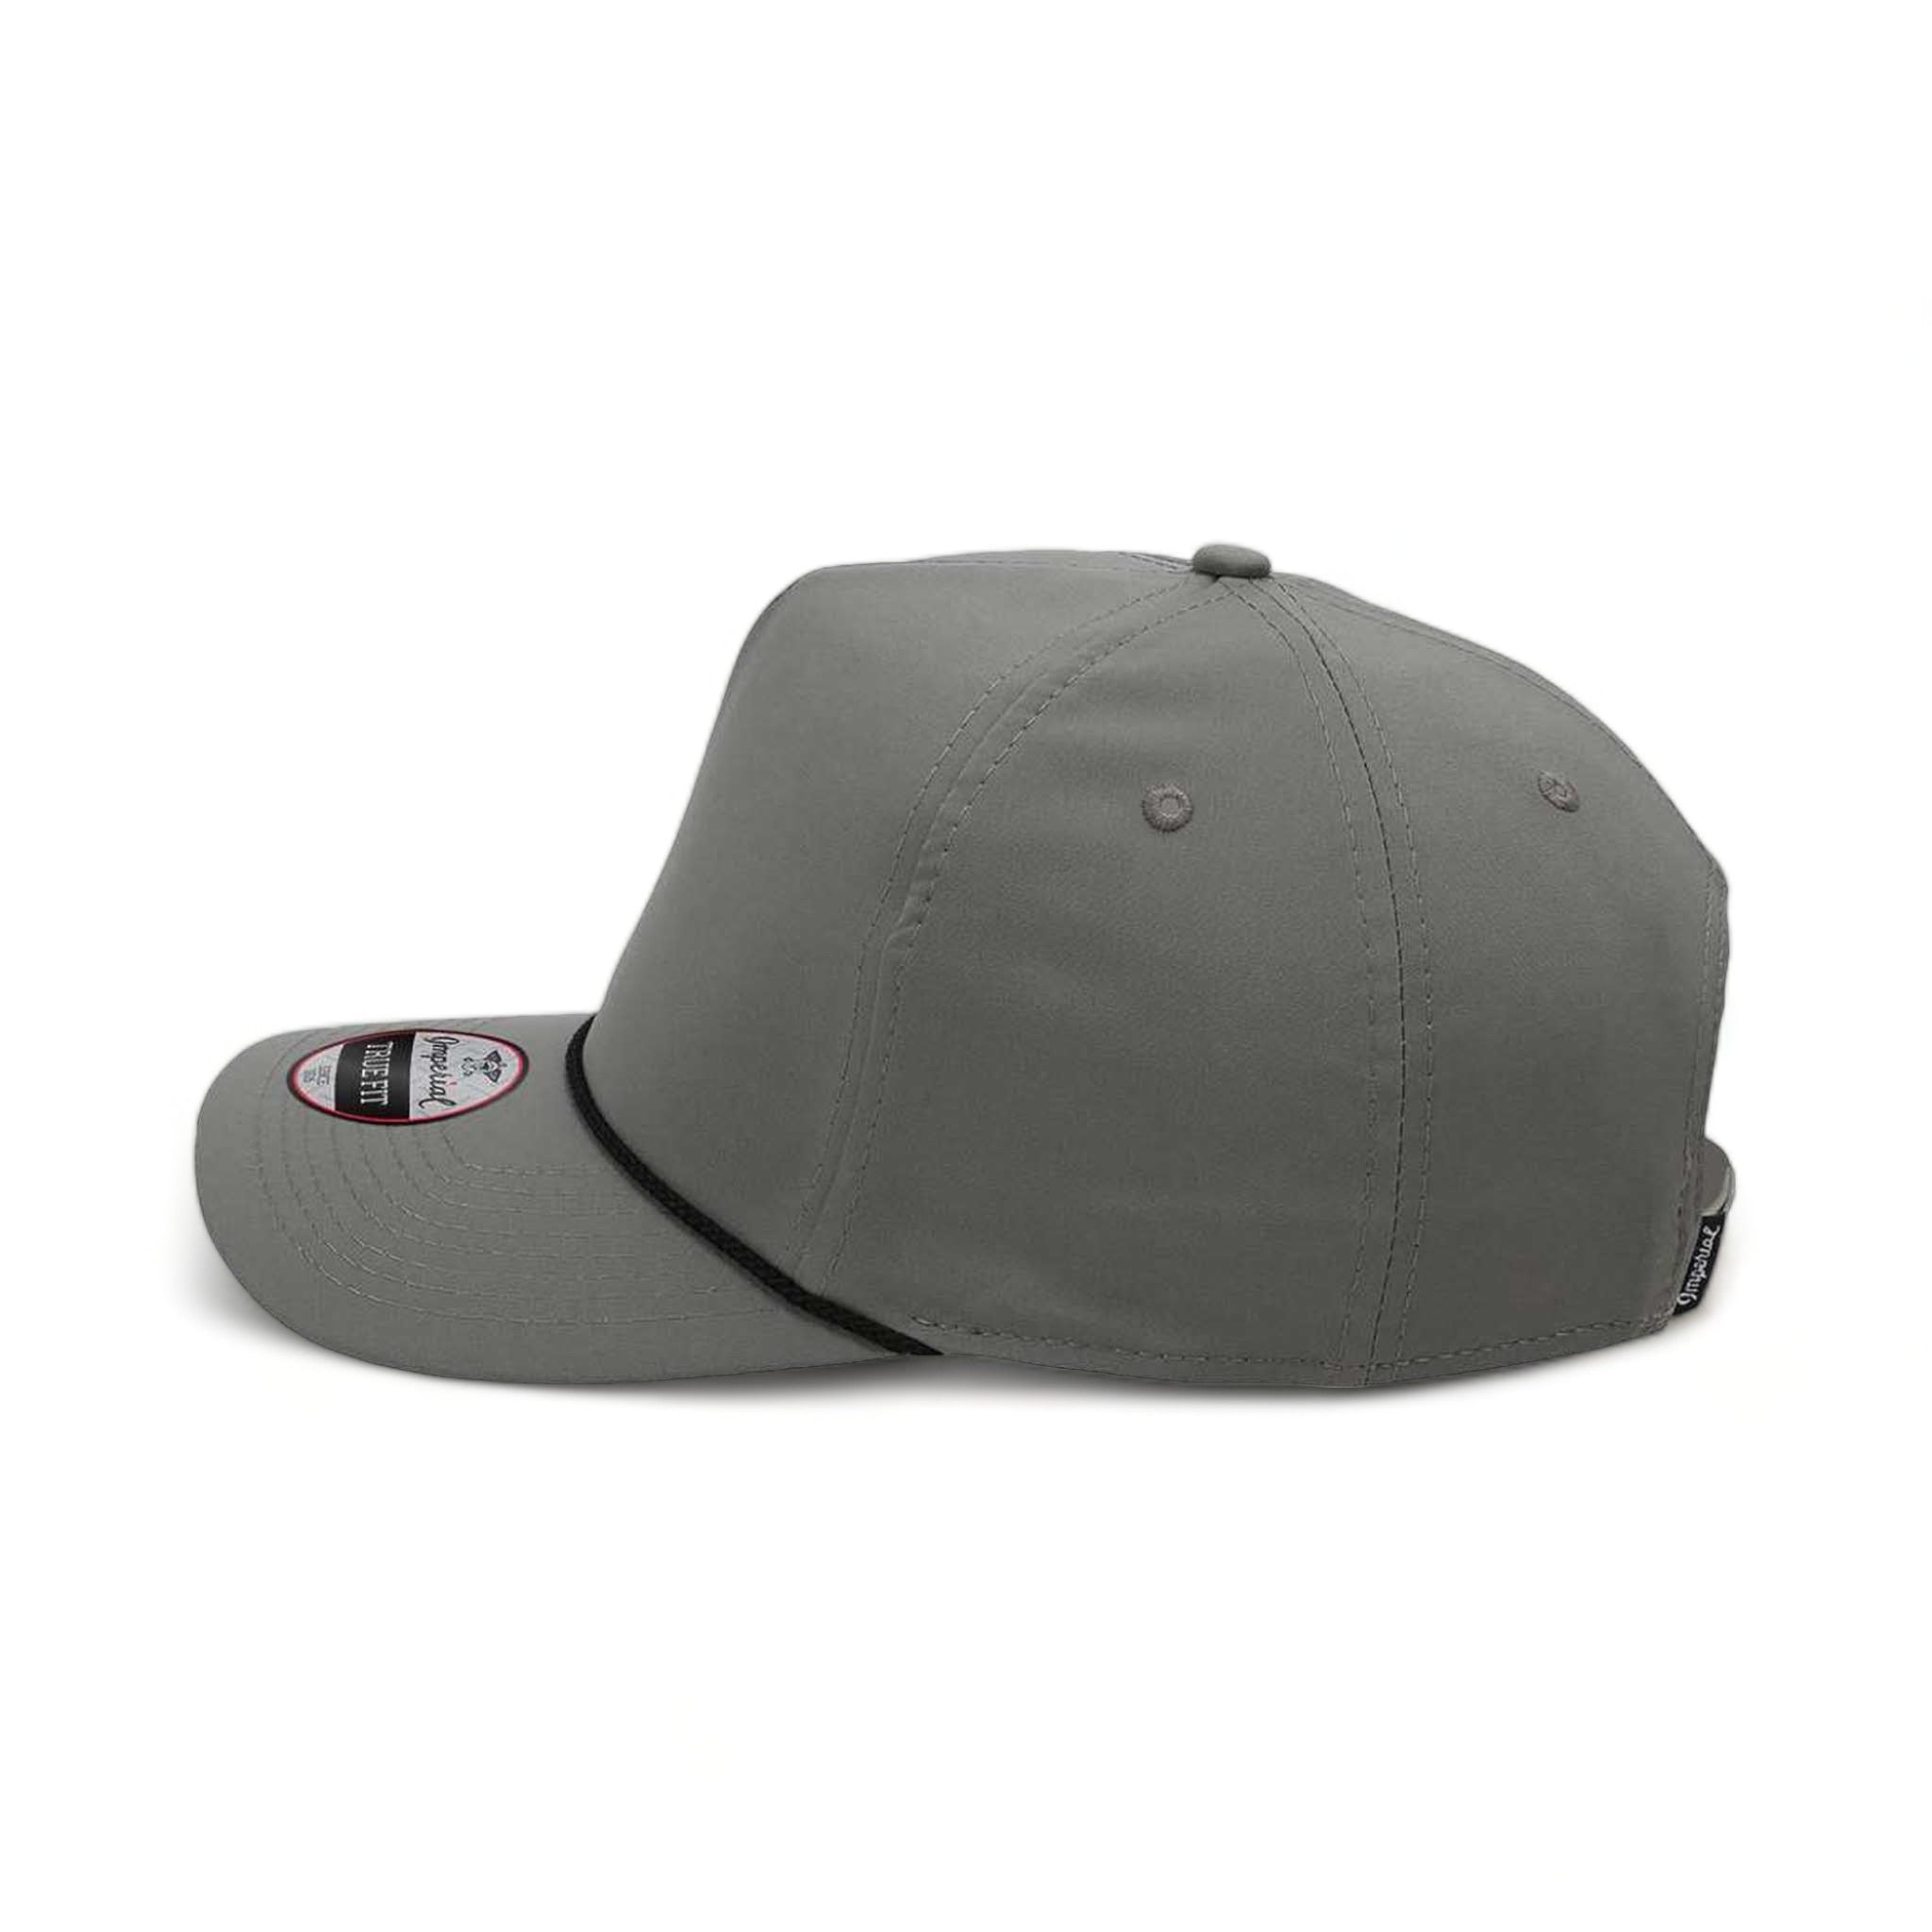 Side view of Imperial 5054 custom hat in grey and black